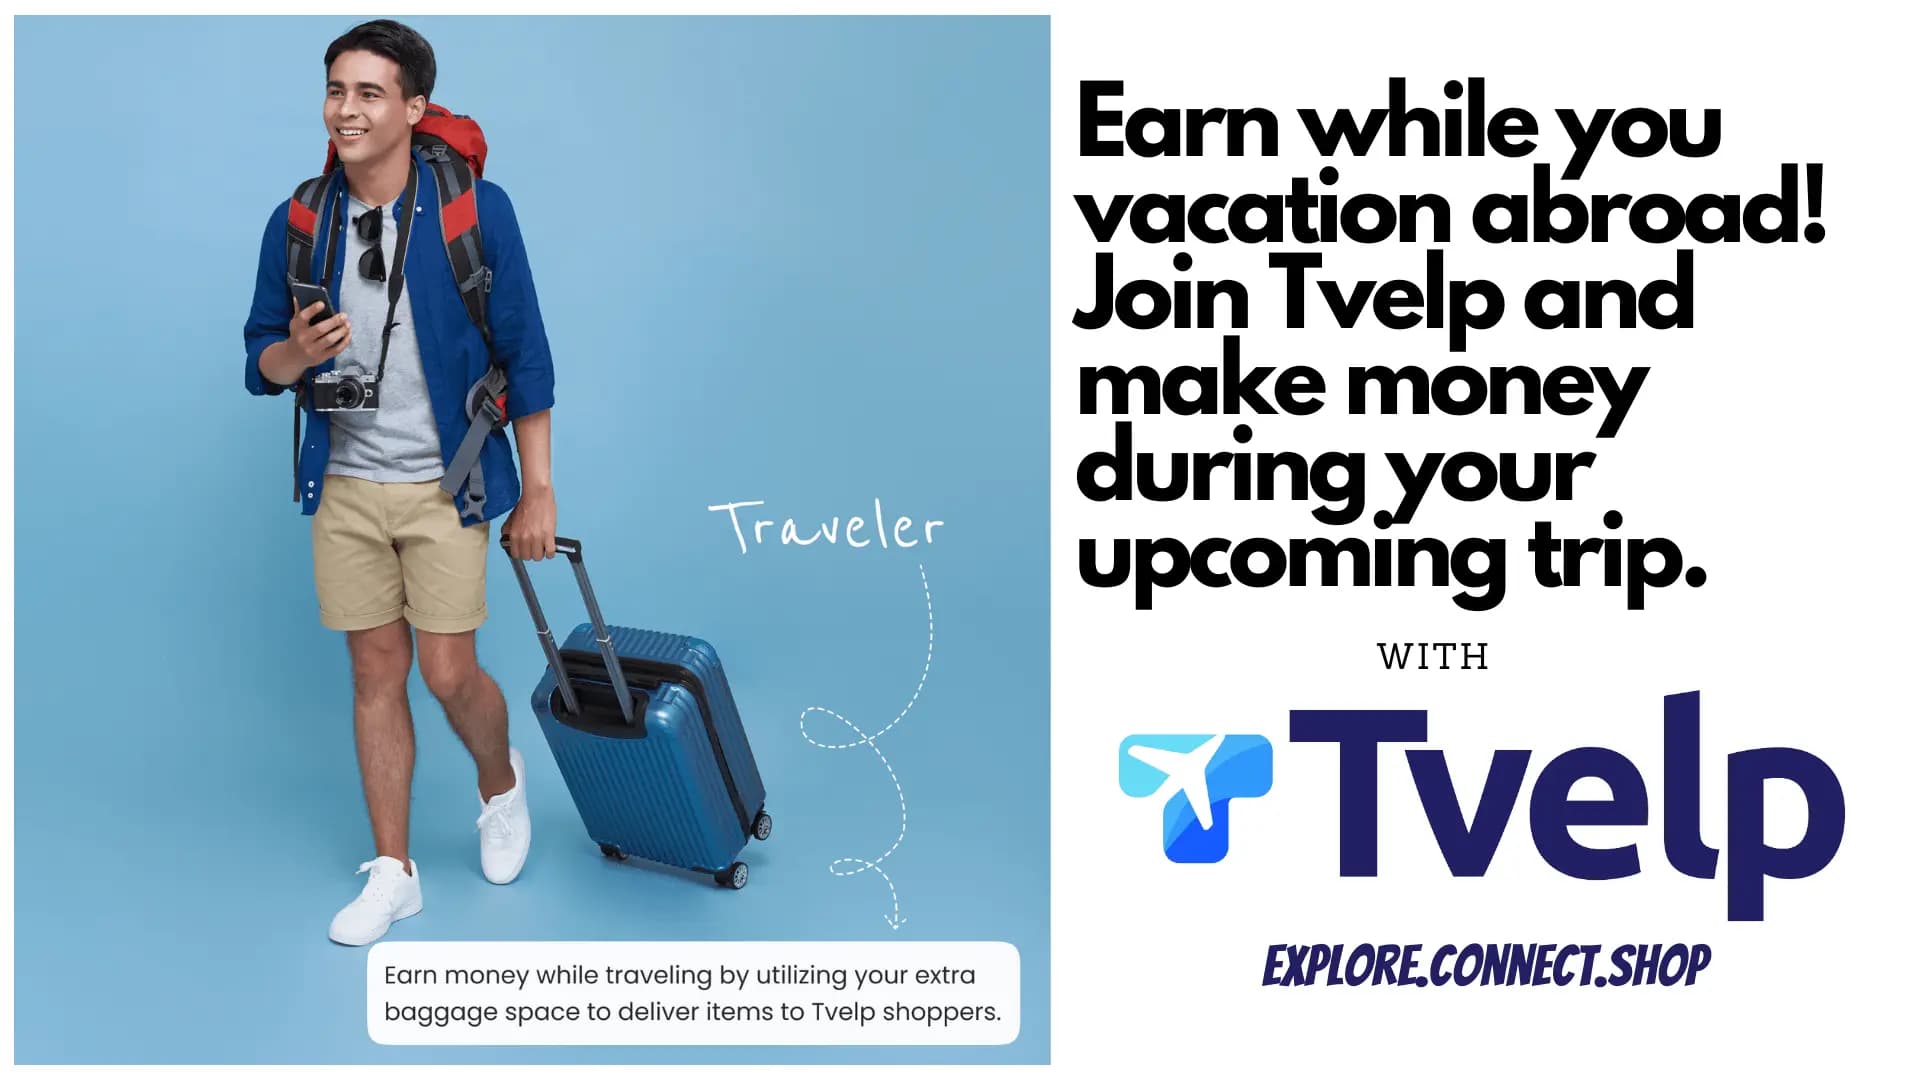 Get Paid to Explore: Turning Travel into Income